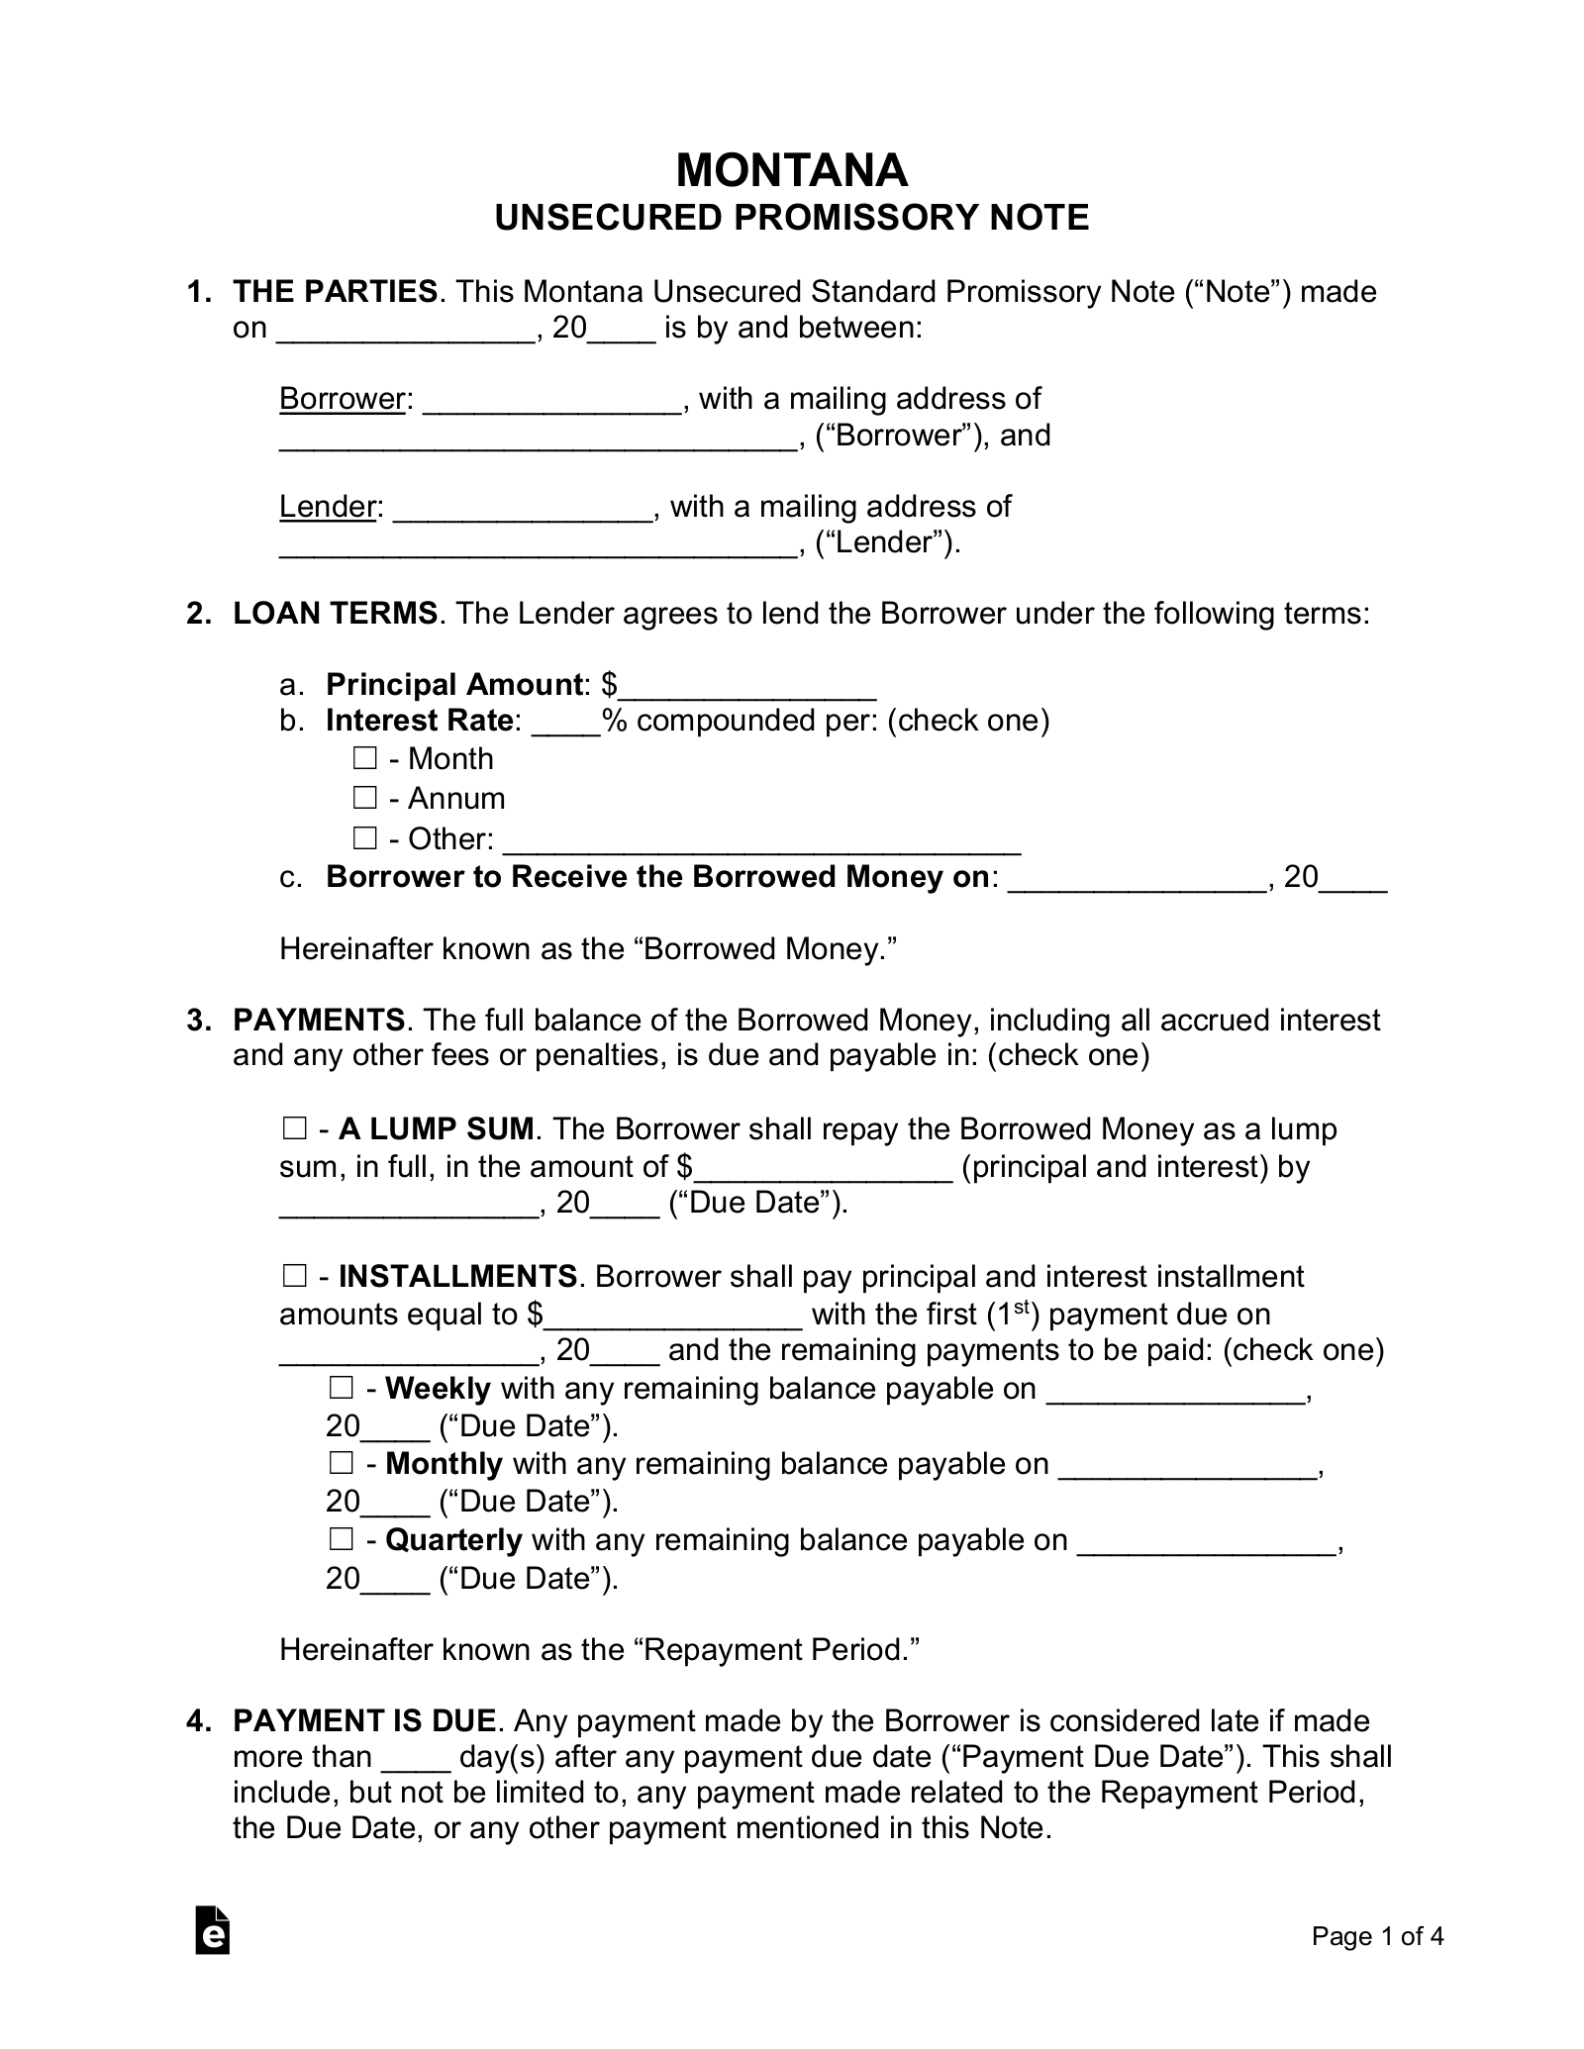 Free Montana Unsecured Promissory Note Template - Word | Pdf | Eforms Intended For Promisory Note Template